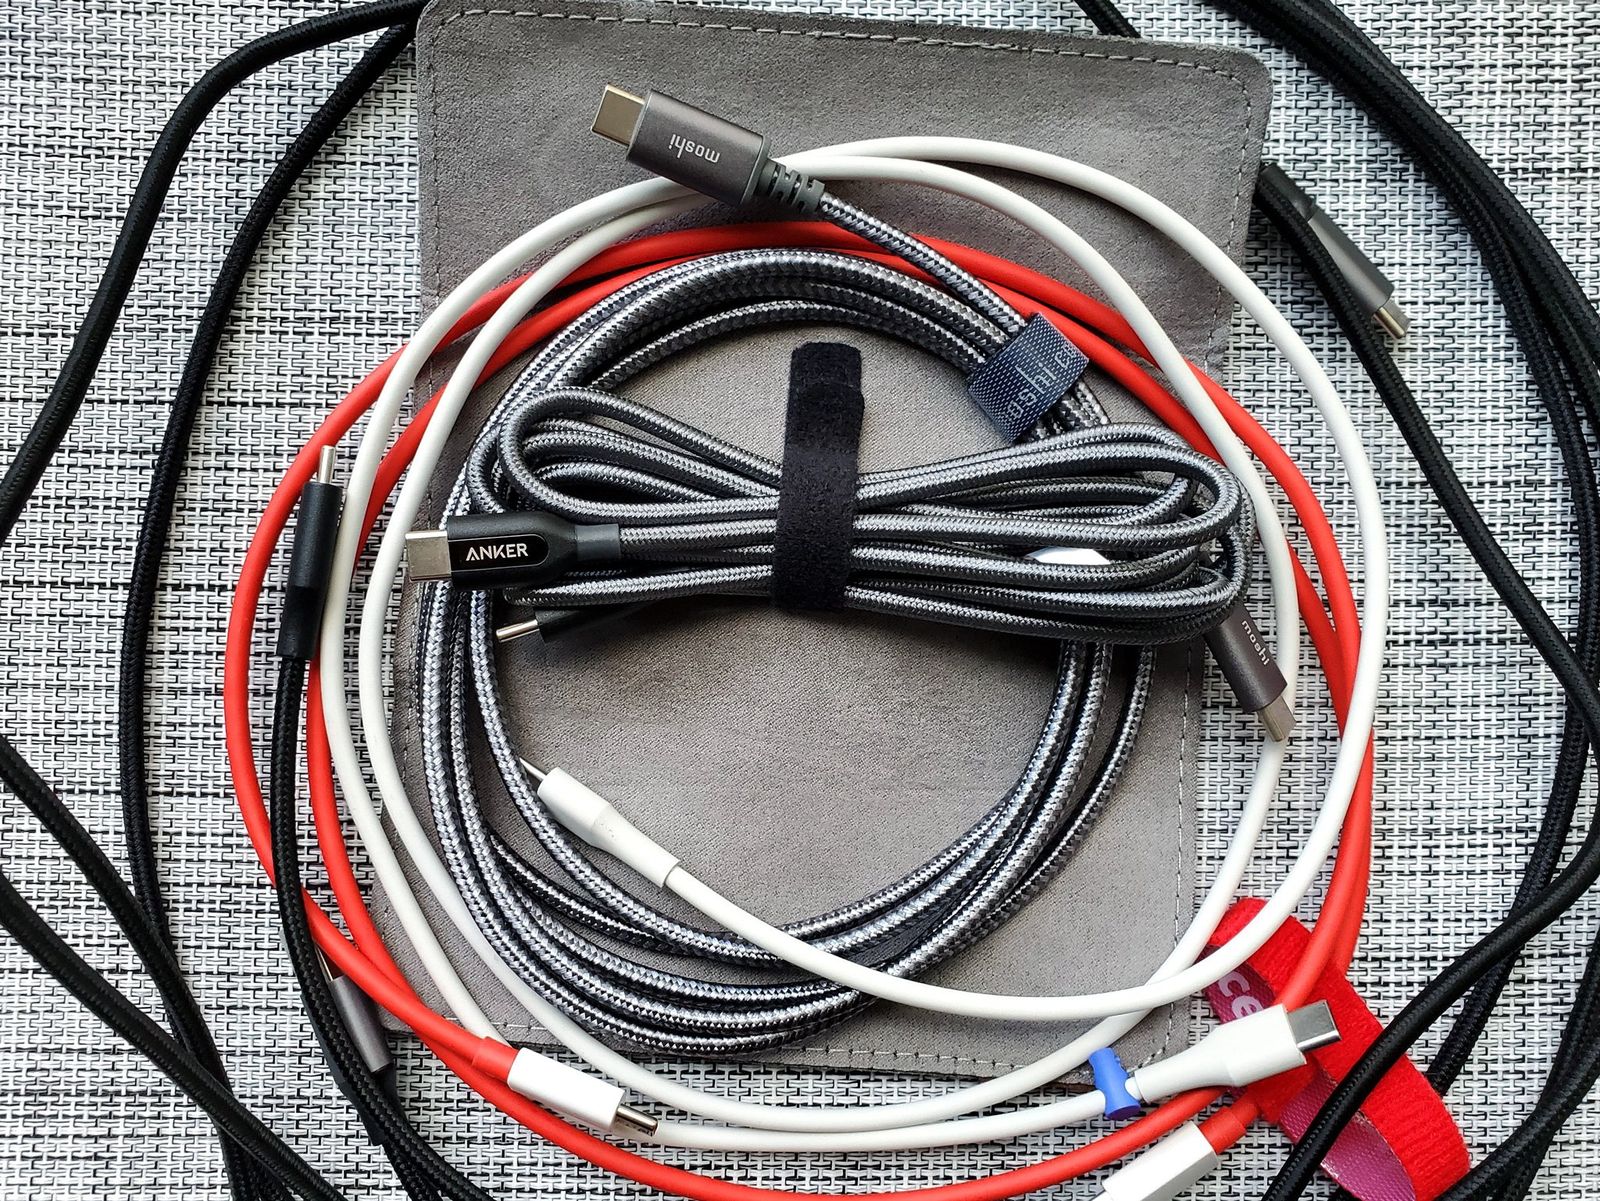 USB Cables in a mess 